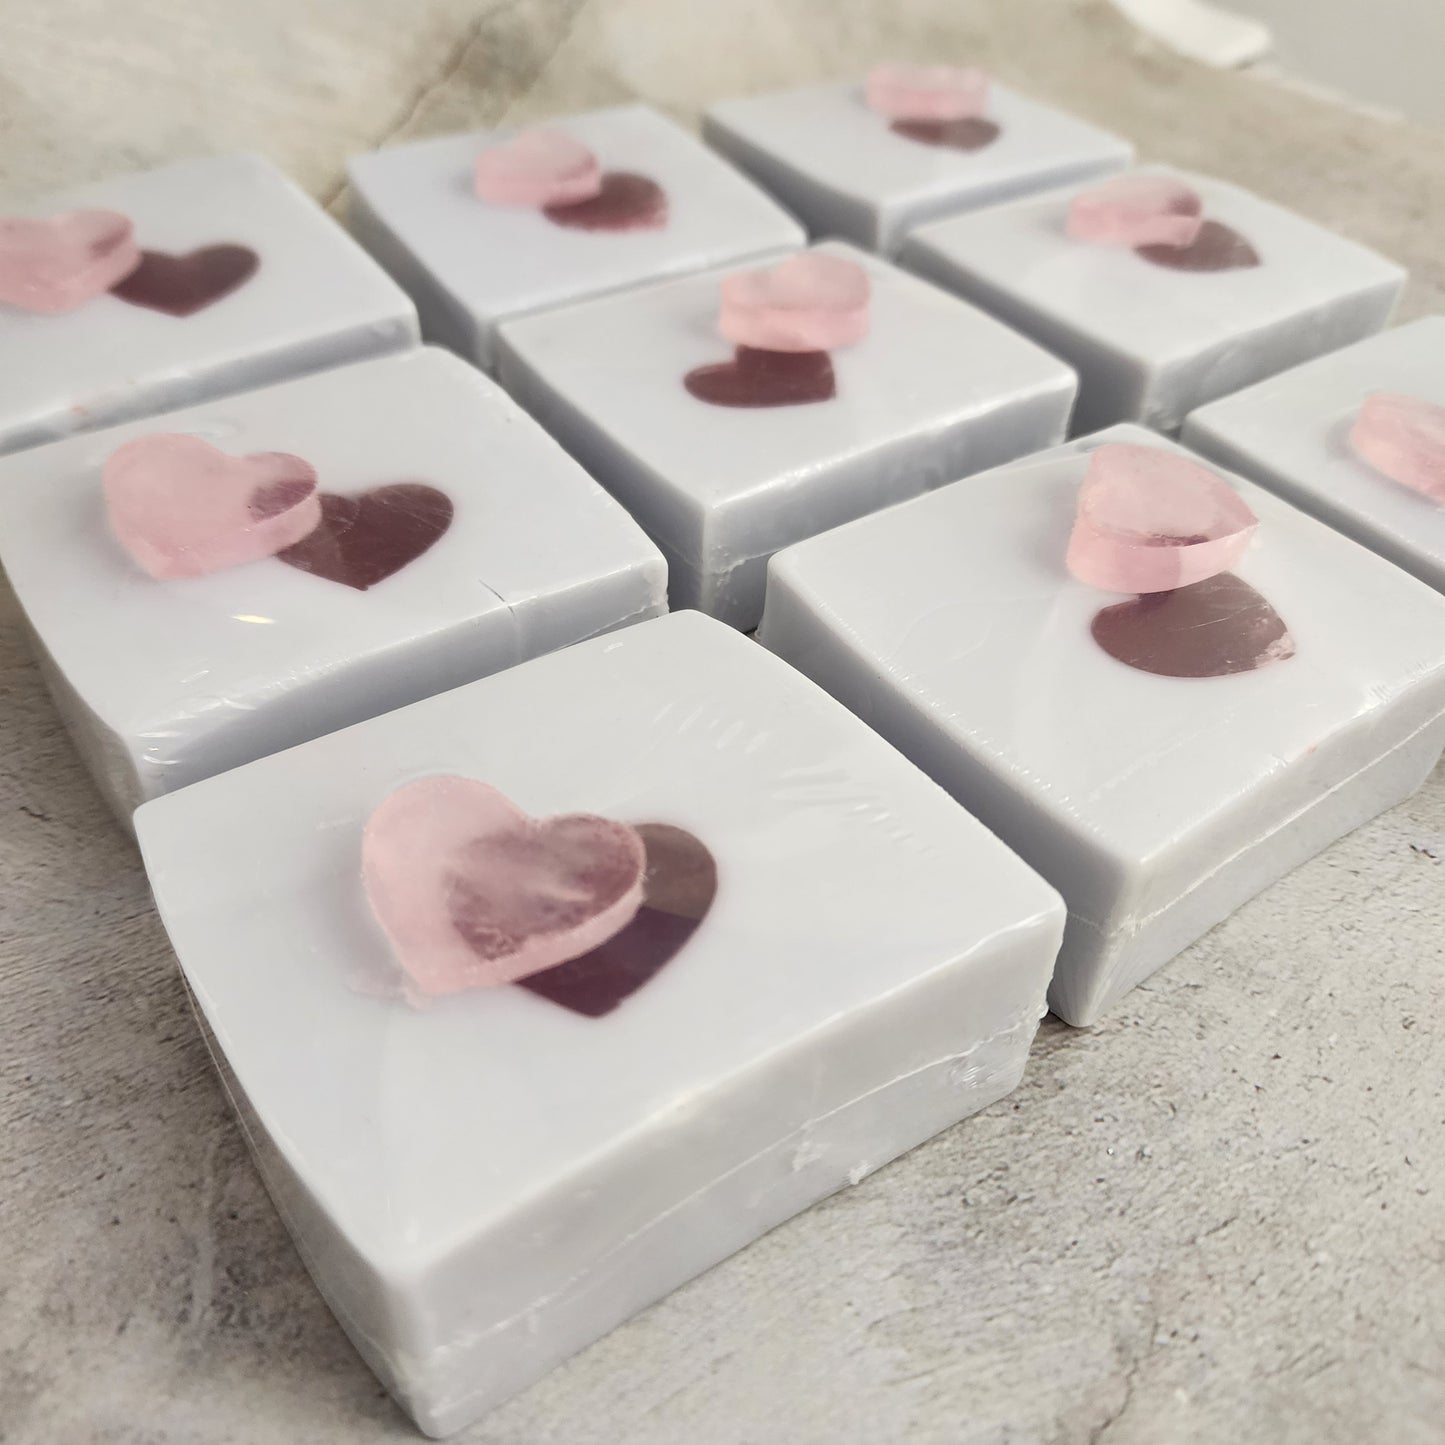 Lover's Bliss - Lavender-Rose Scented Goat Milk Soap with Hearts